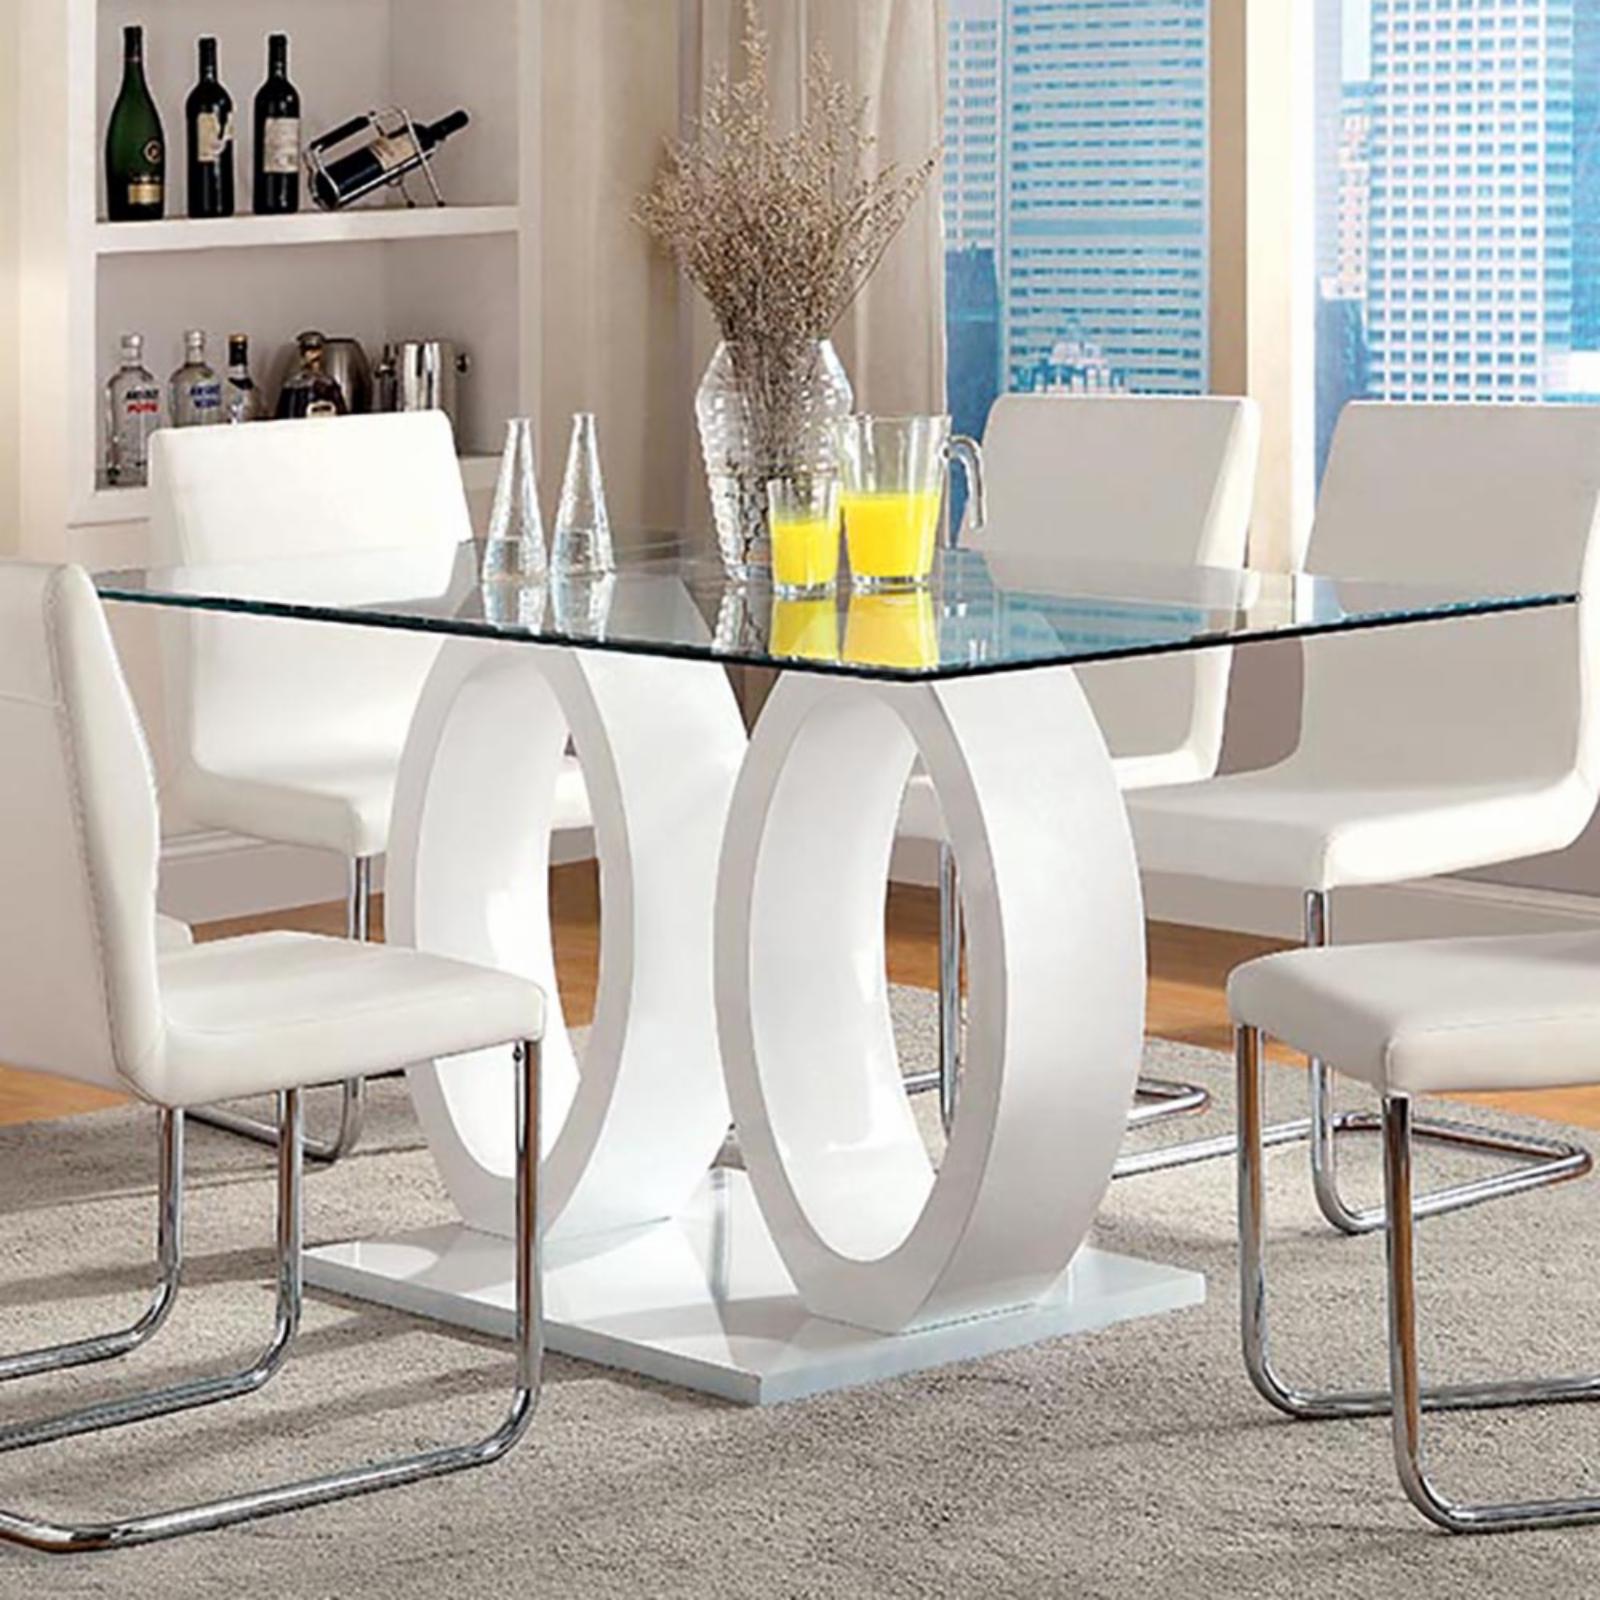 Furniture of America Damore Contemporary High Gloss Dining Table - image 5 of 9